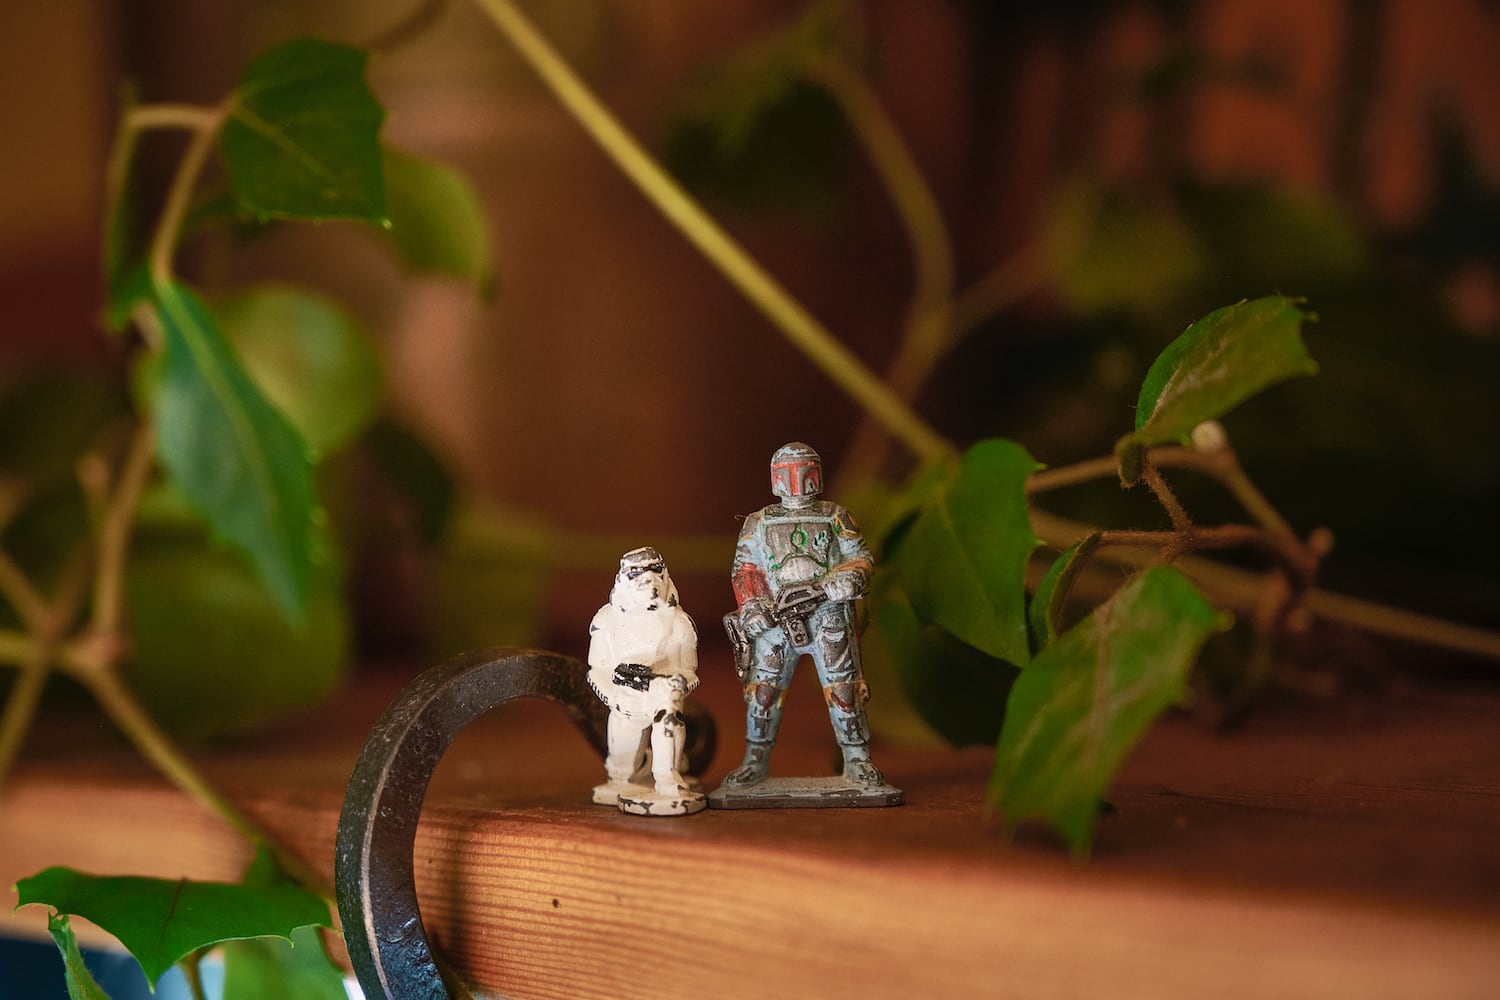 Miniature toys in playful detail of Northwest kitchen remodel's plant shelf